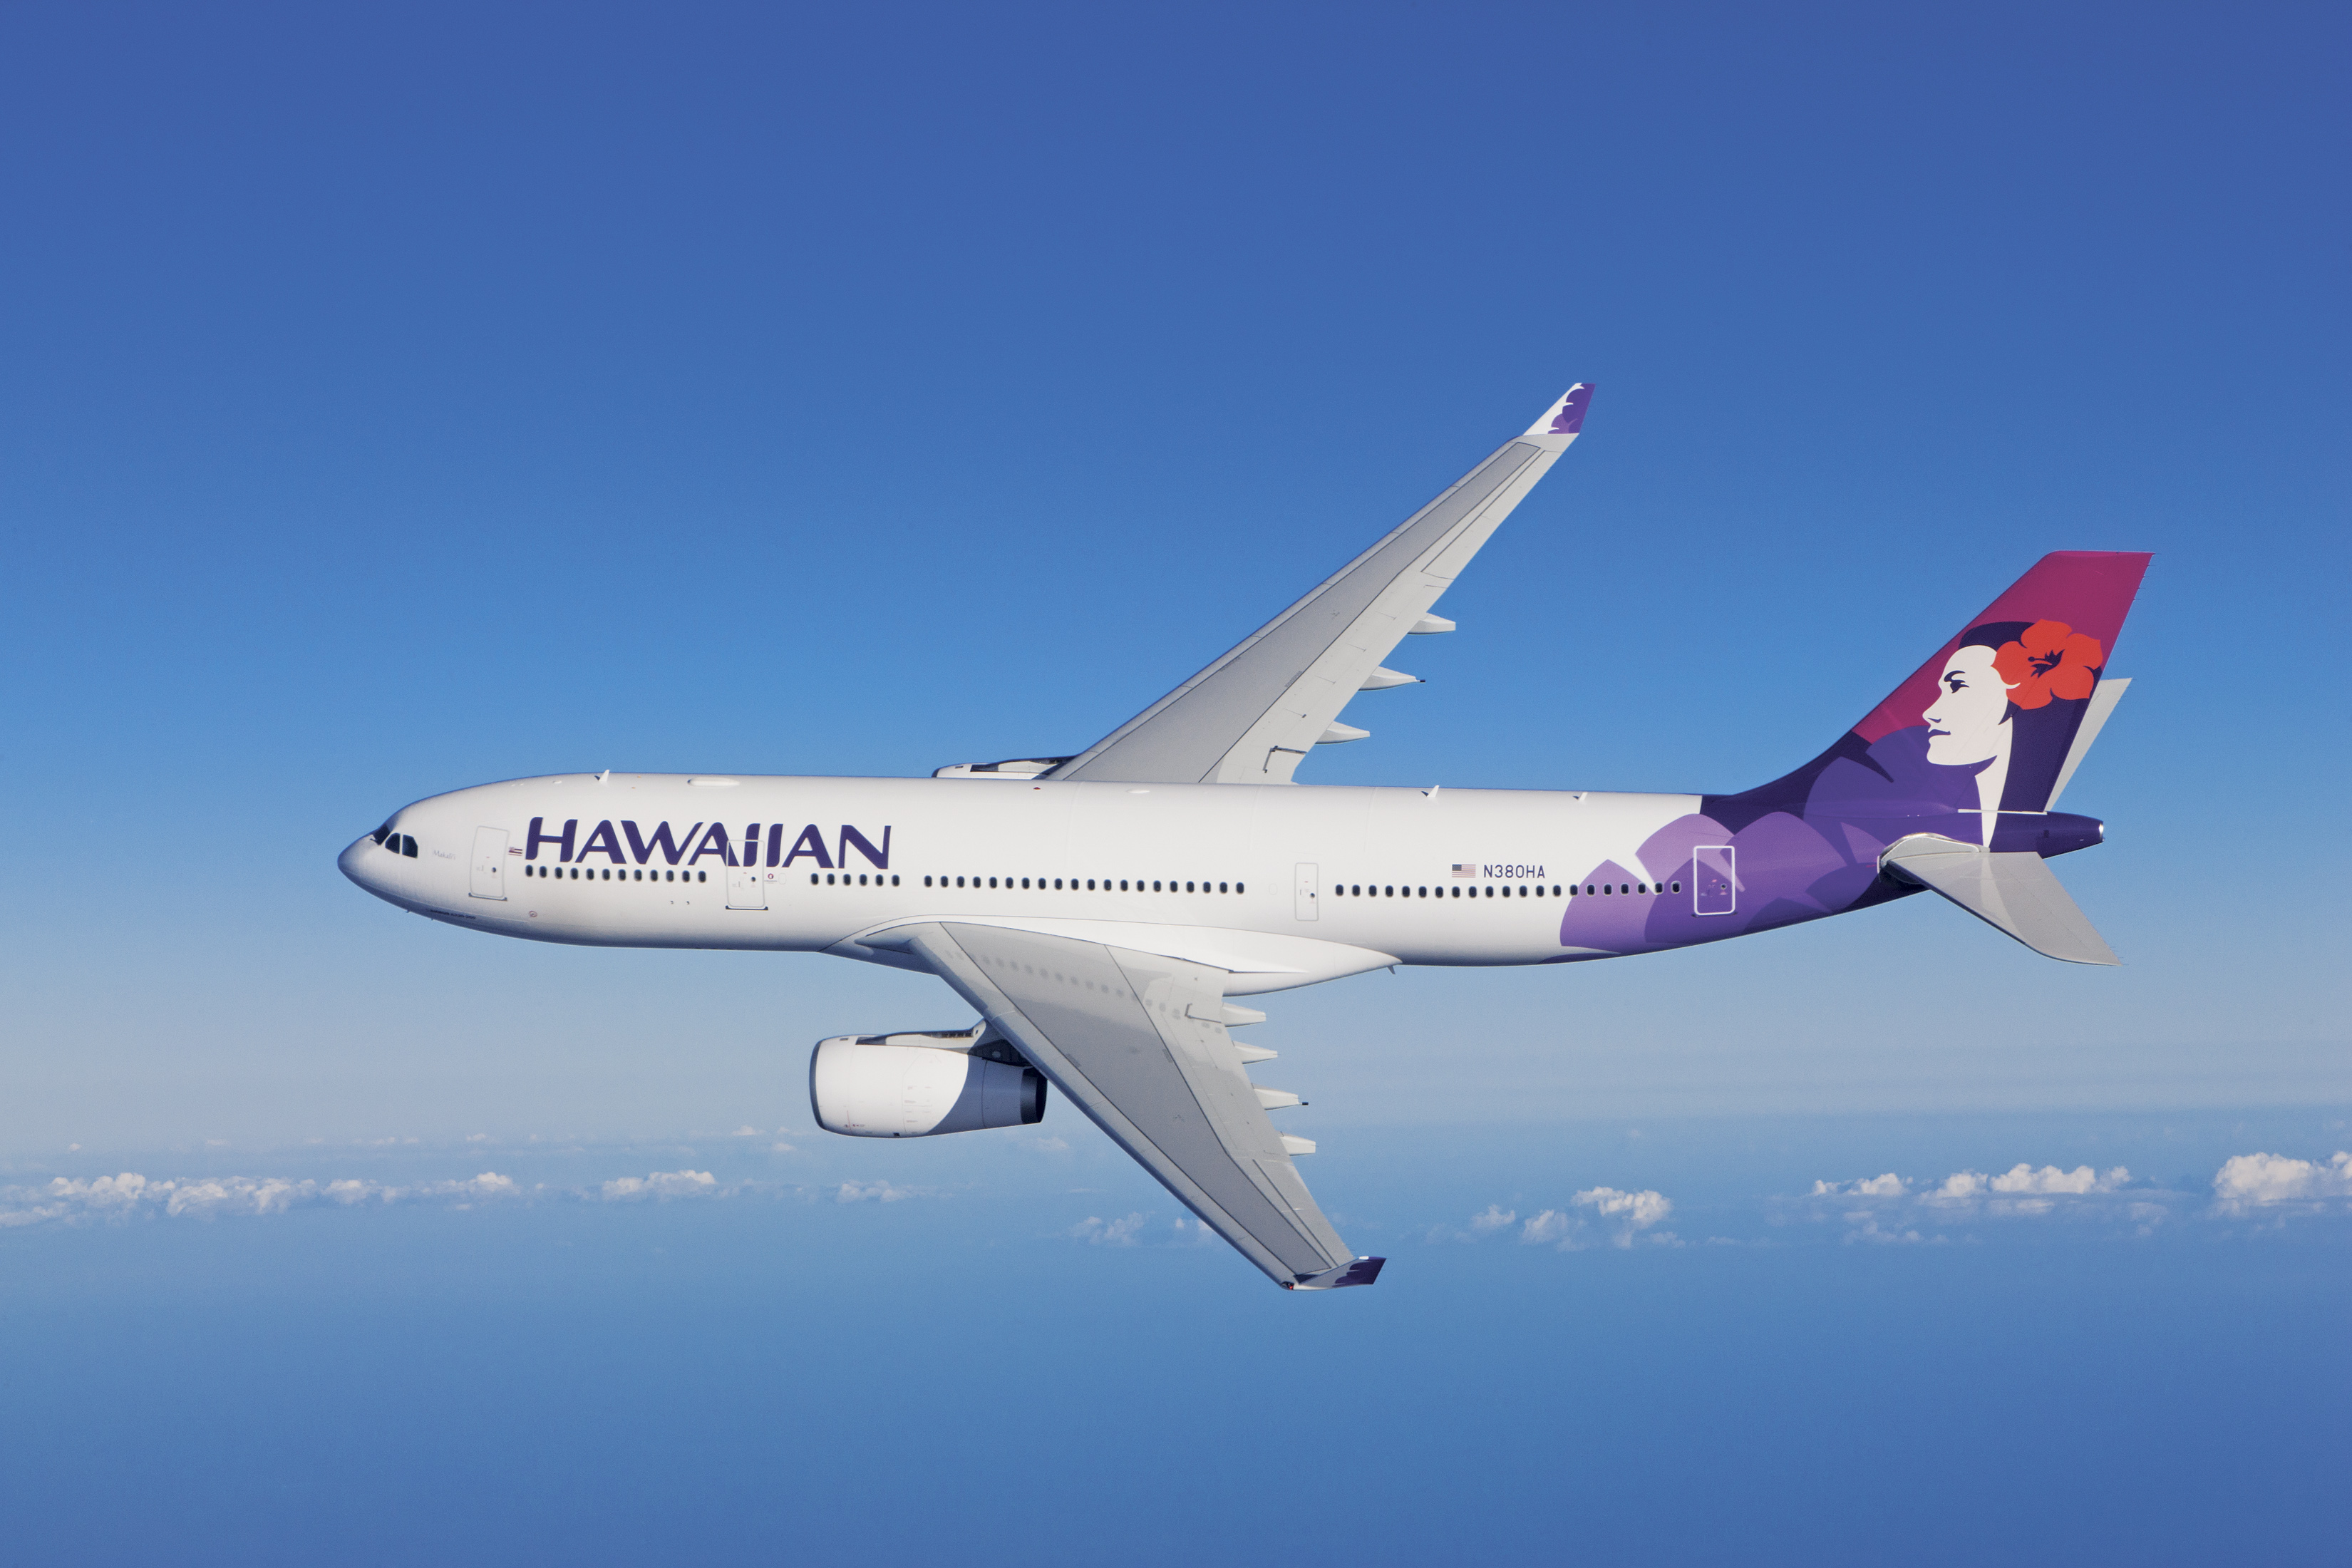 Hawaiian Airlines Airbus A330 (N380HA) - AirlineReporter